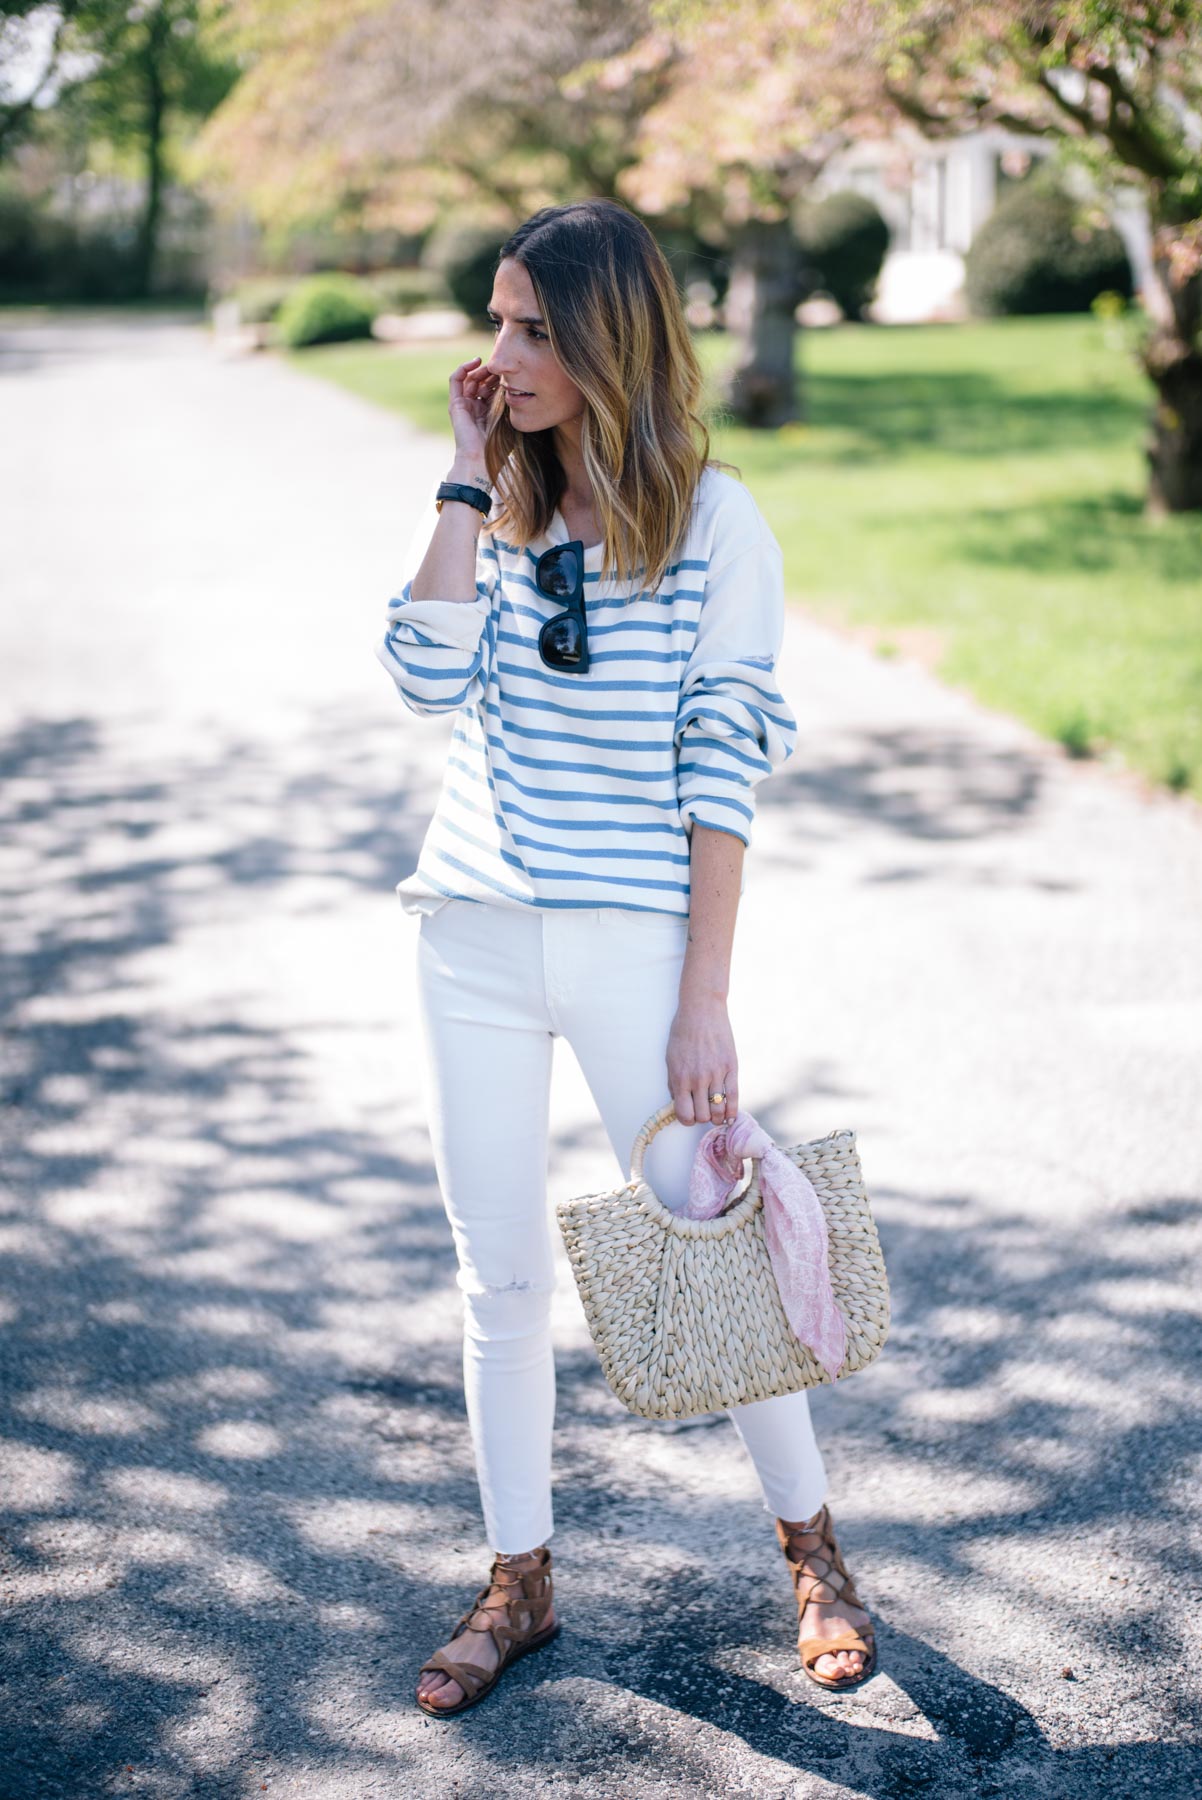 #OOTD: Is There Anything More Classic Than Blue & White Stripes?